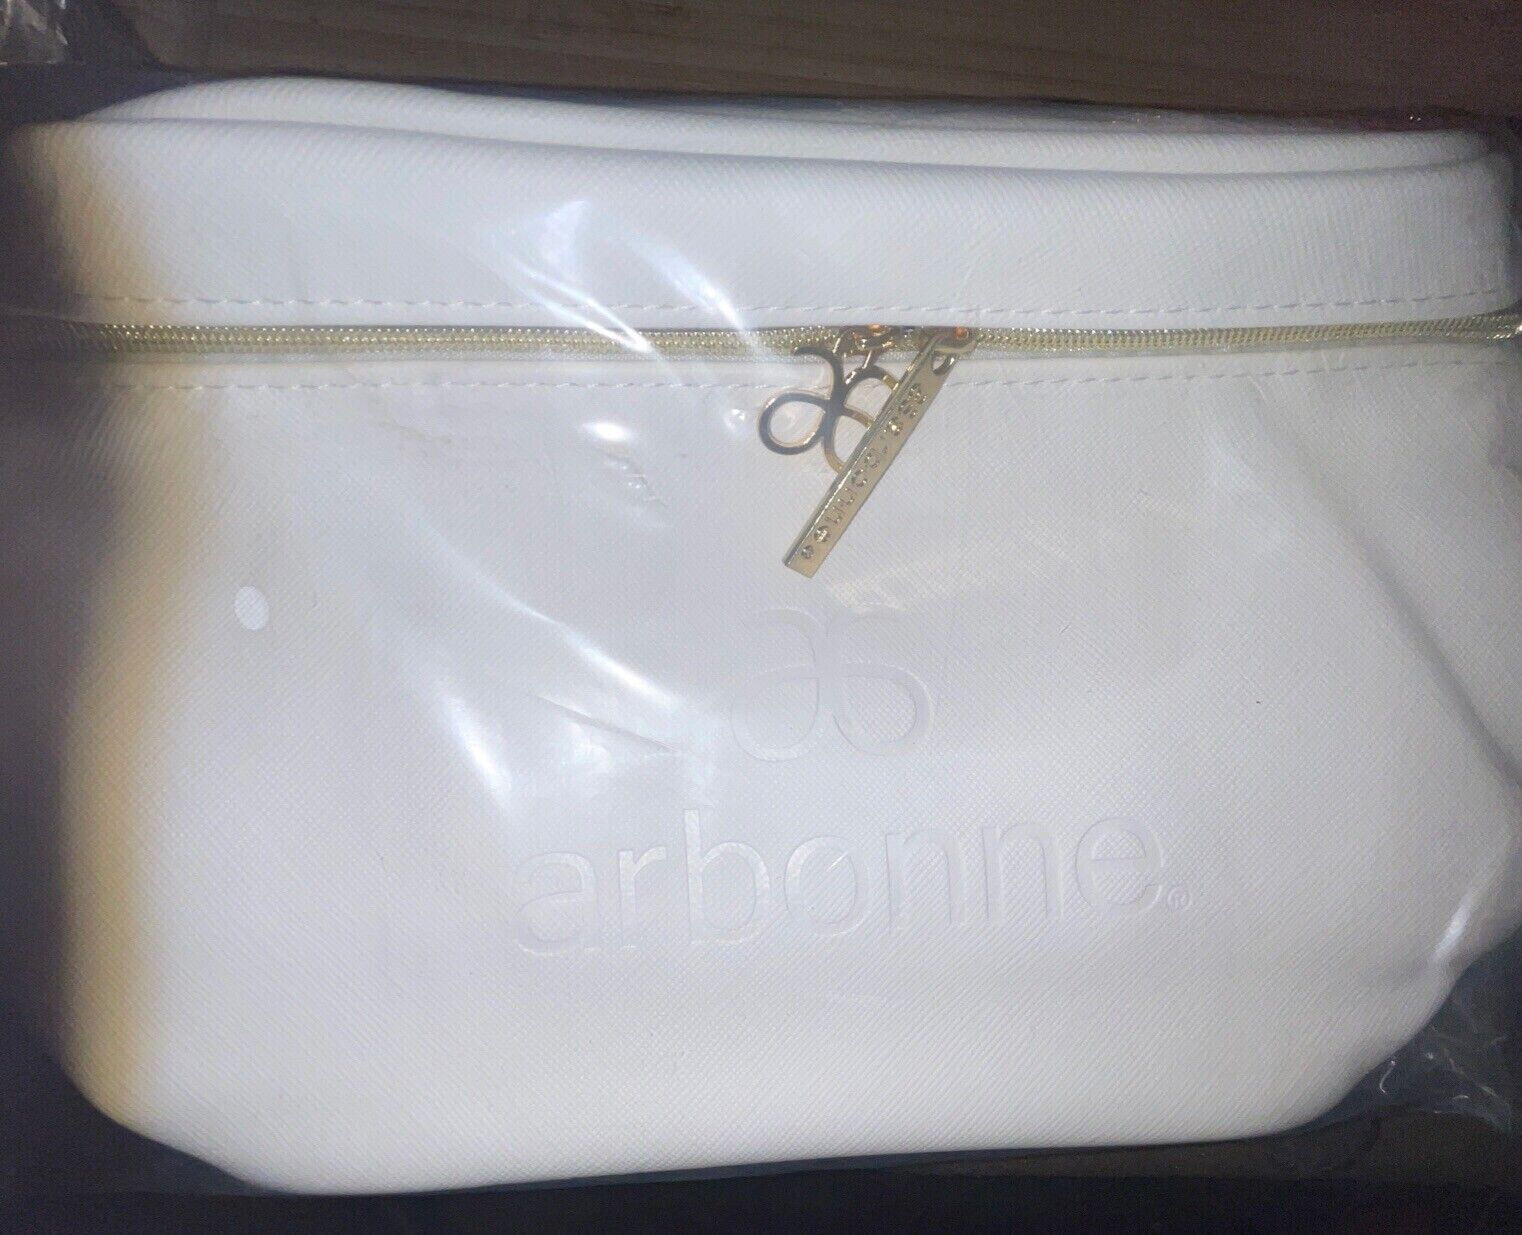 Arbonne logo White faux leather Toiletries cosmetic travel bag with Zipper NEW H